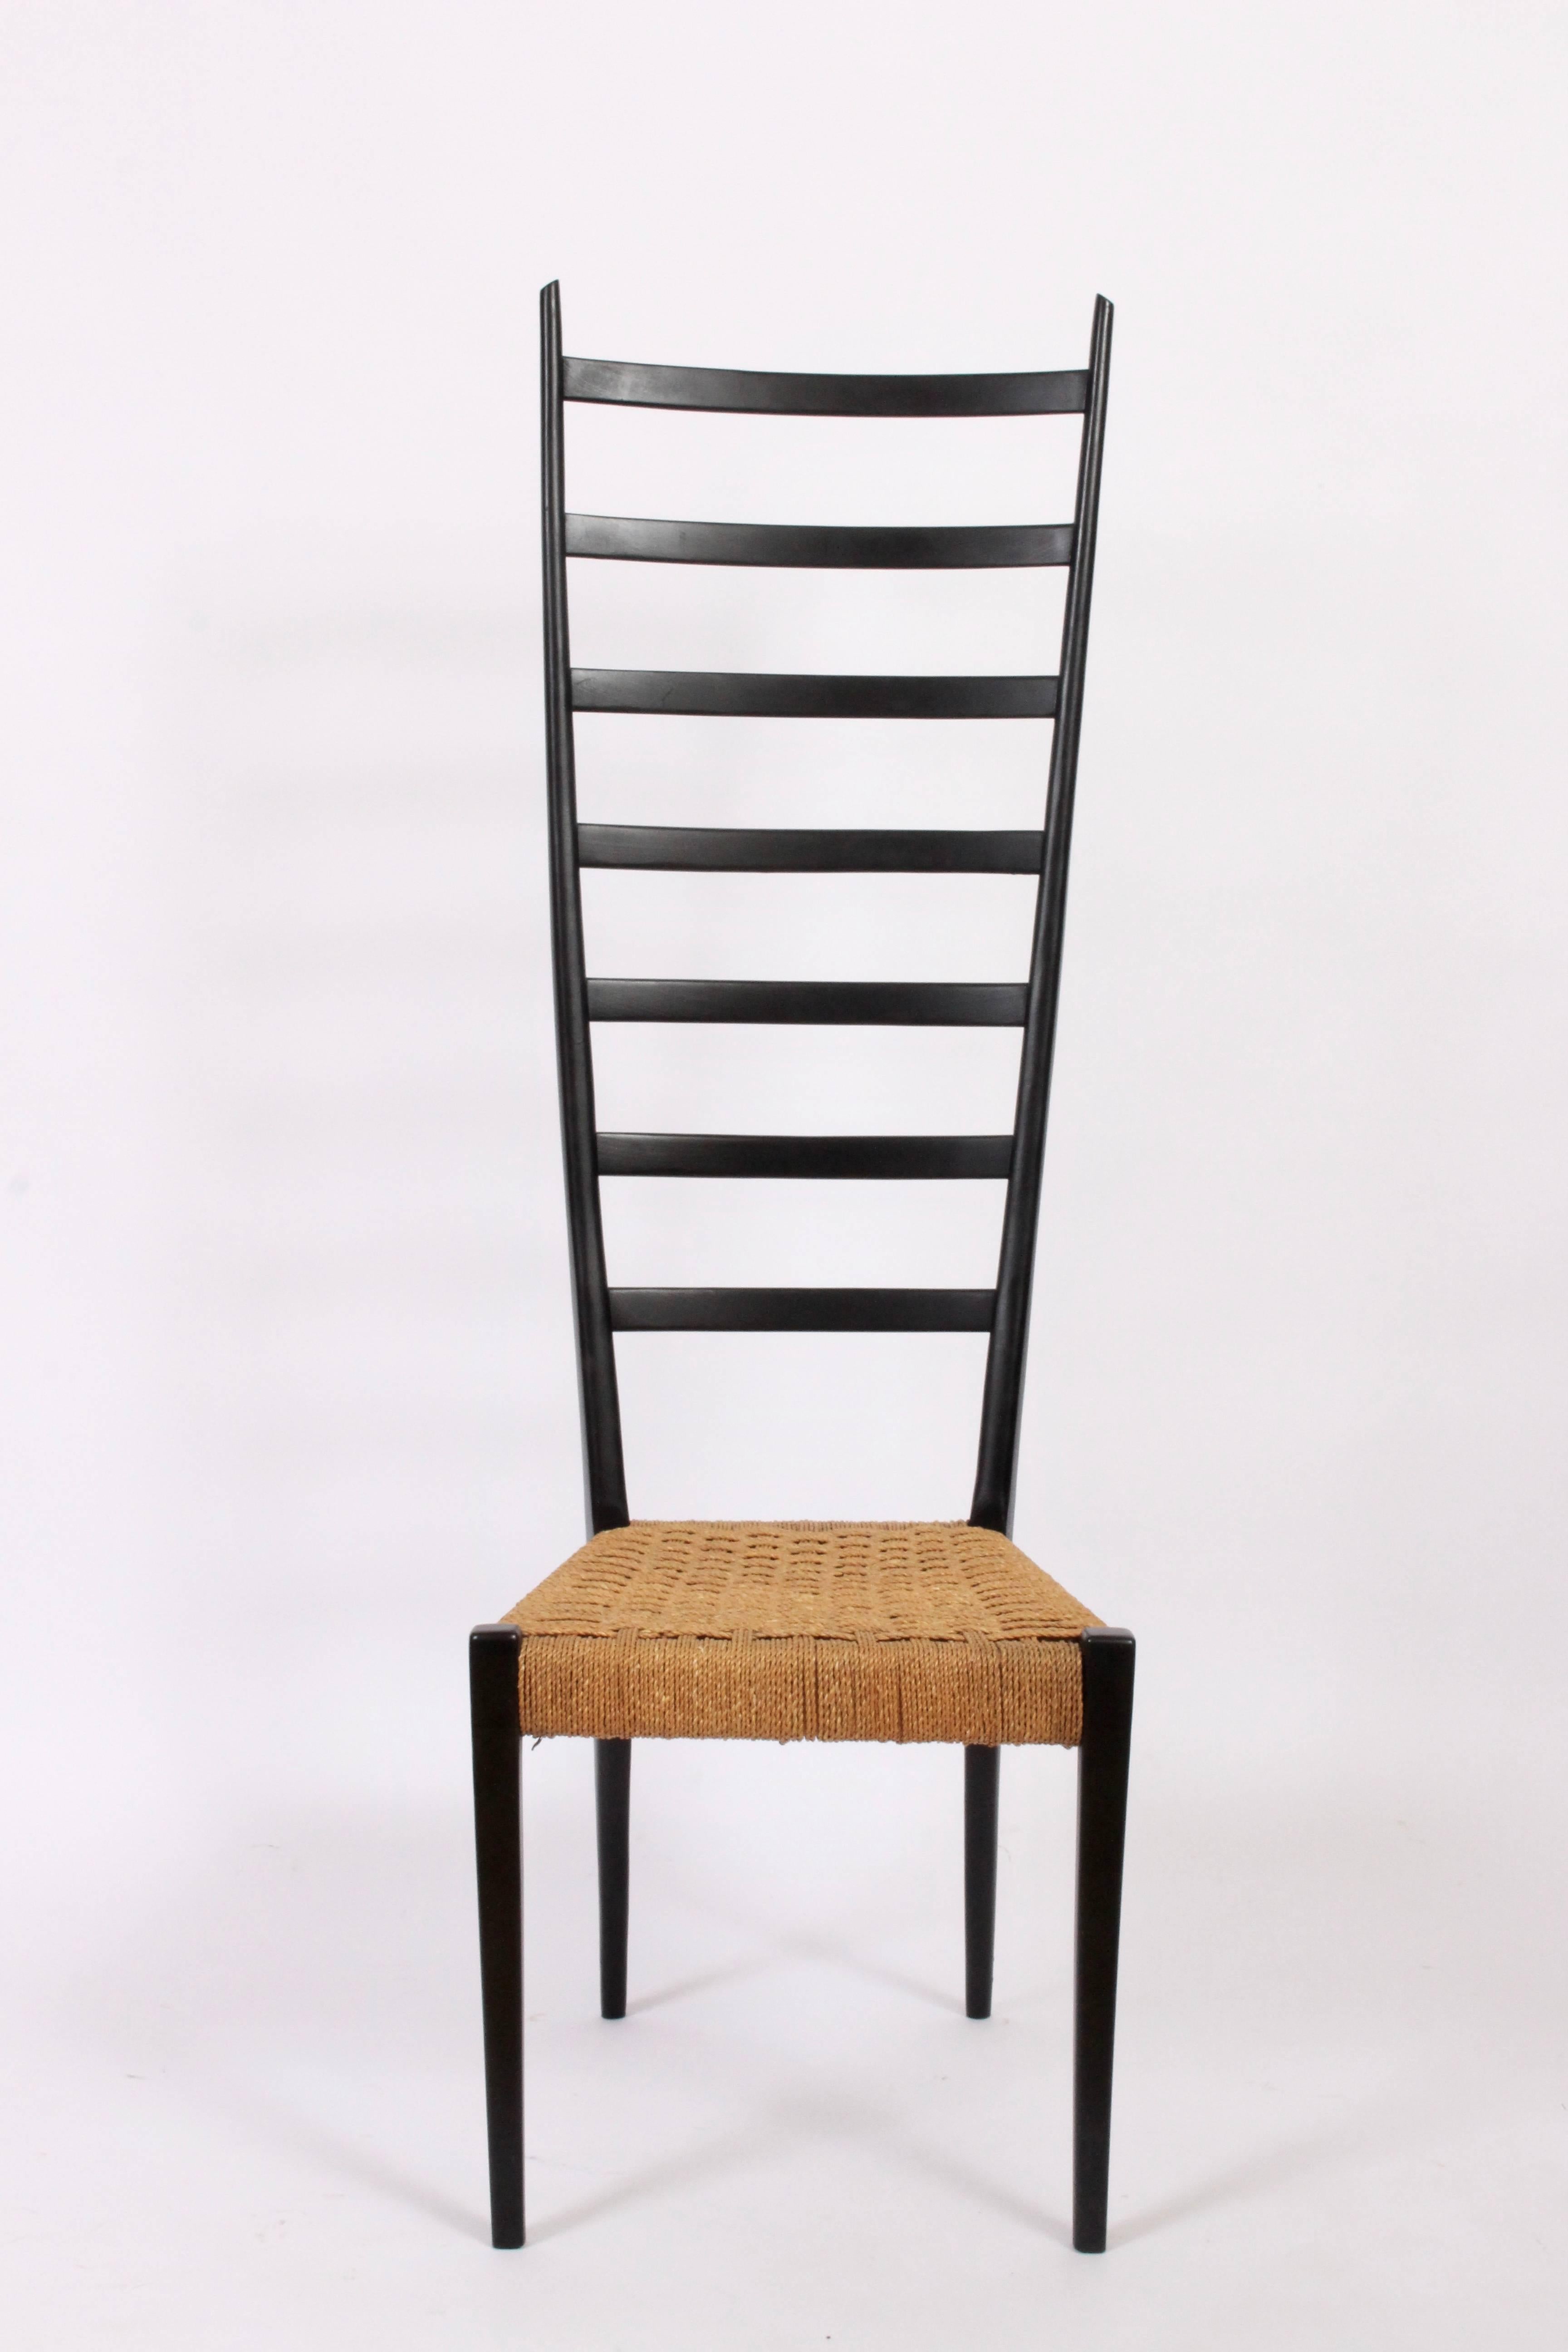 Tall Italian Modern black lacquer ladder back accent chair by Chiavari, Italy.  Featuring a slightly curved back black lacquer frame with comfortable woven rush seat. Small footprint. Sculptural. Statement seating. Without damage or repair to rush.